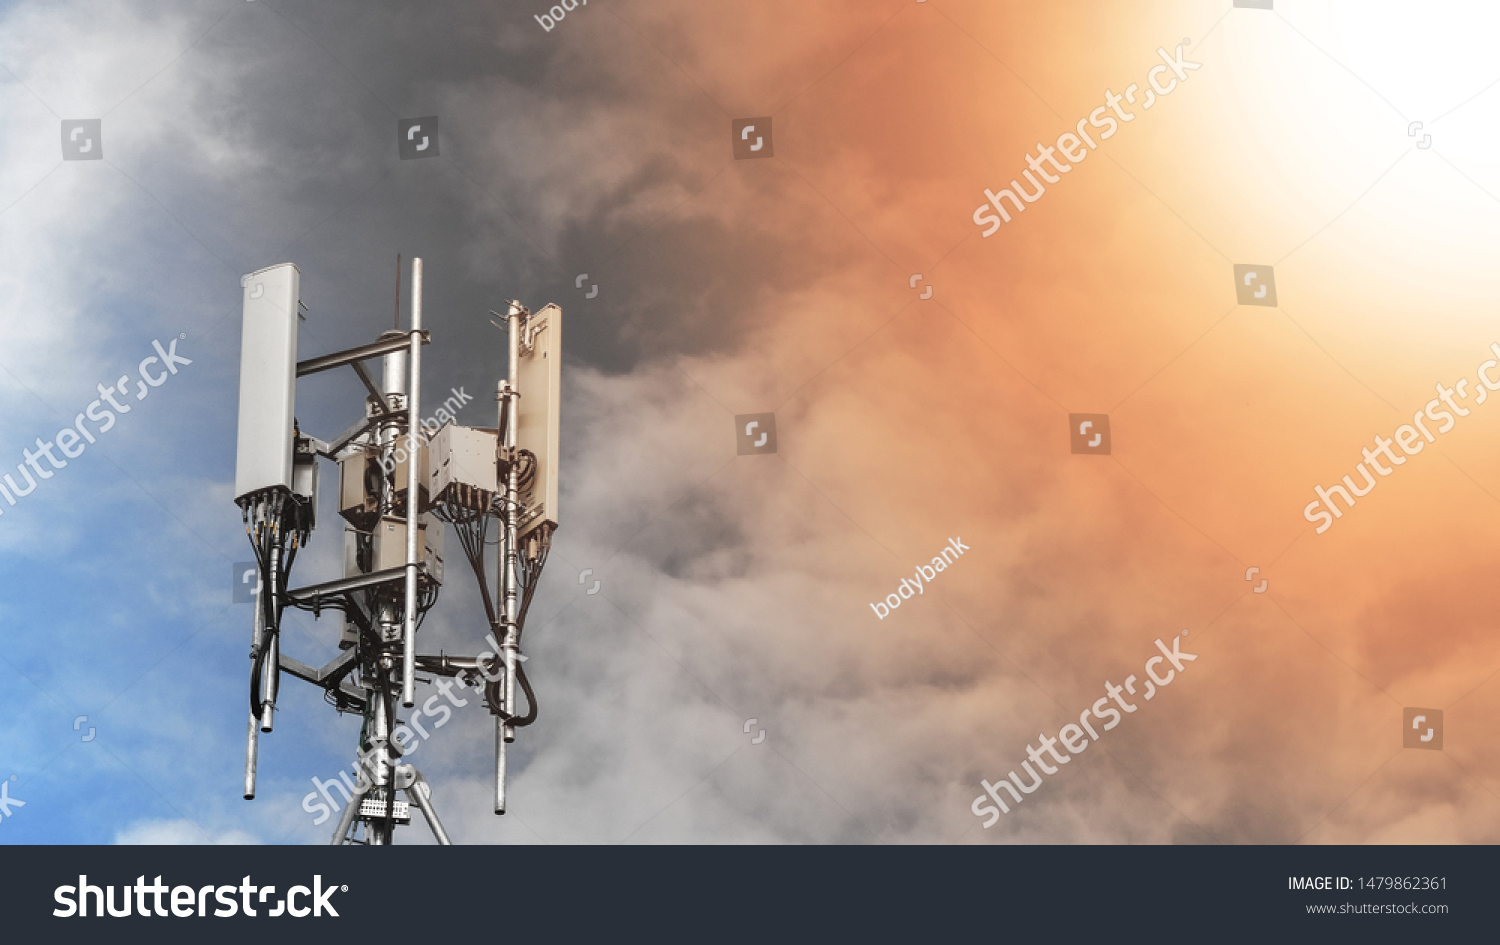 Technology on the top of the telecommunication. Cellular phone antennas on a building roof.Telecommunication mast television antennas.Receiving and transmitting stations. #1479862361